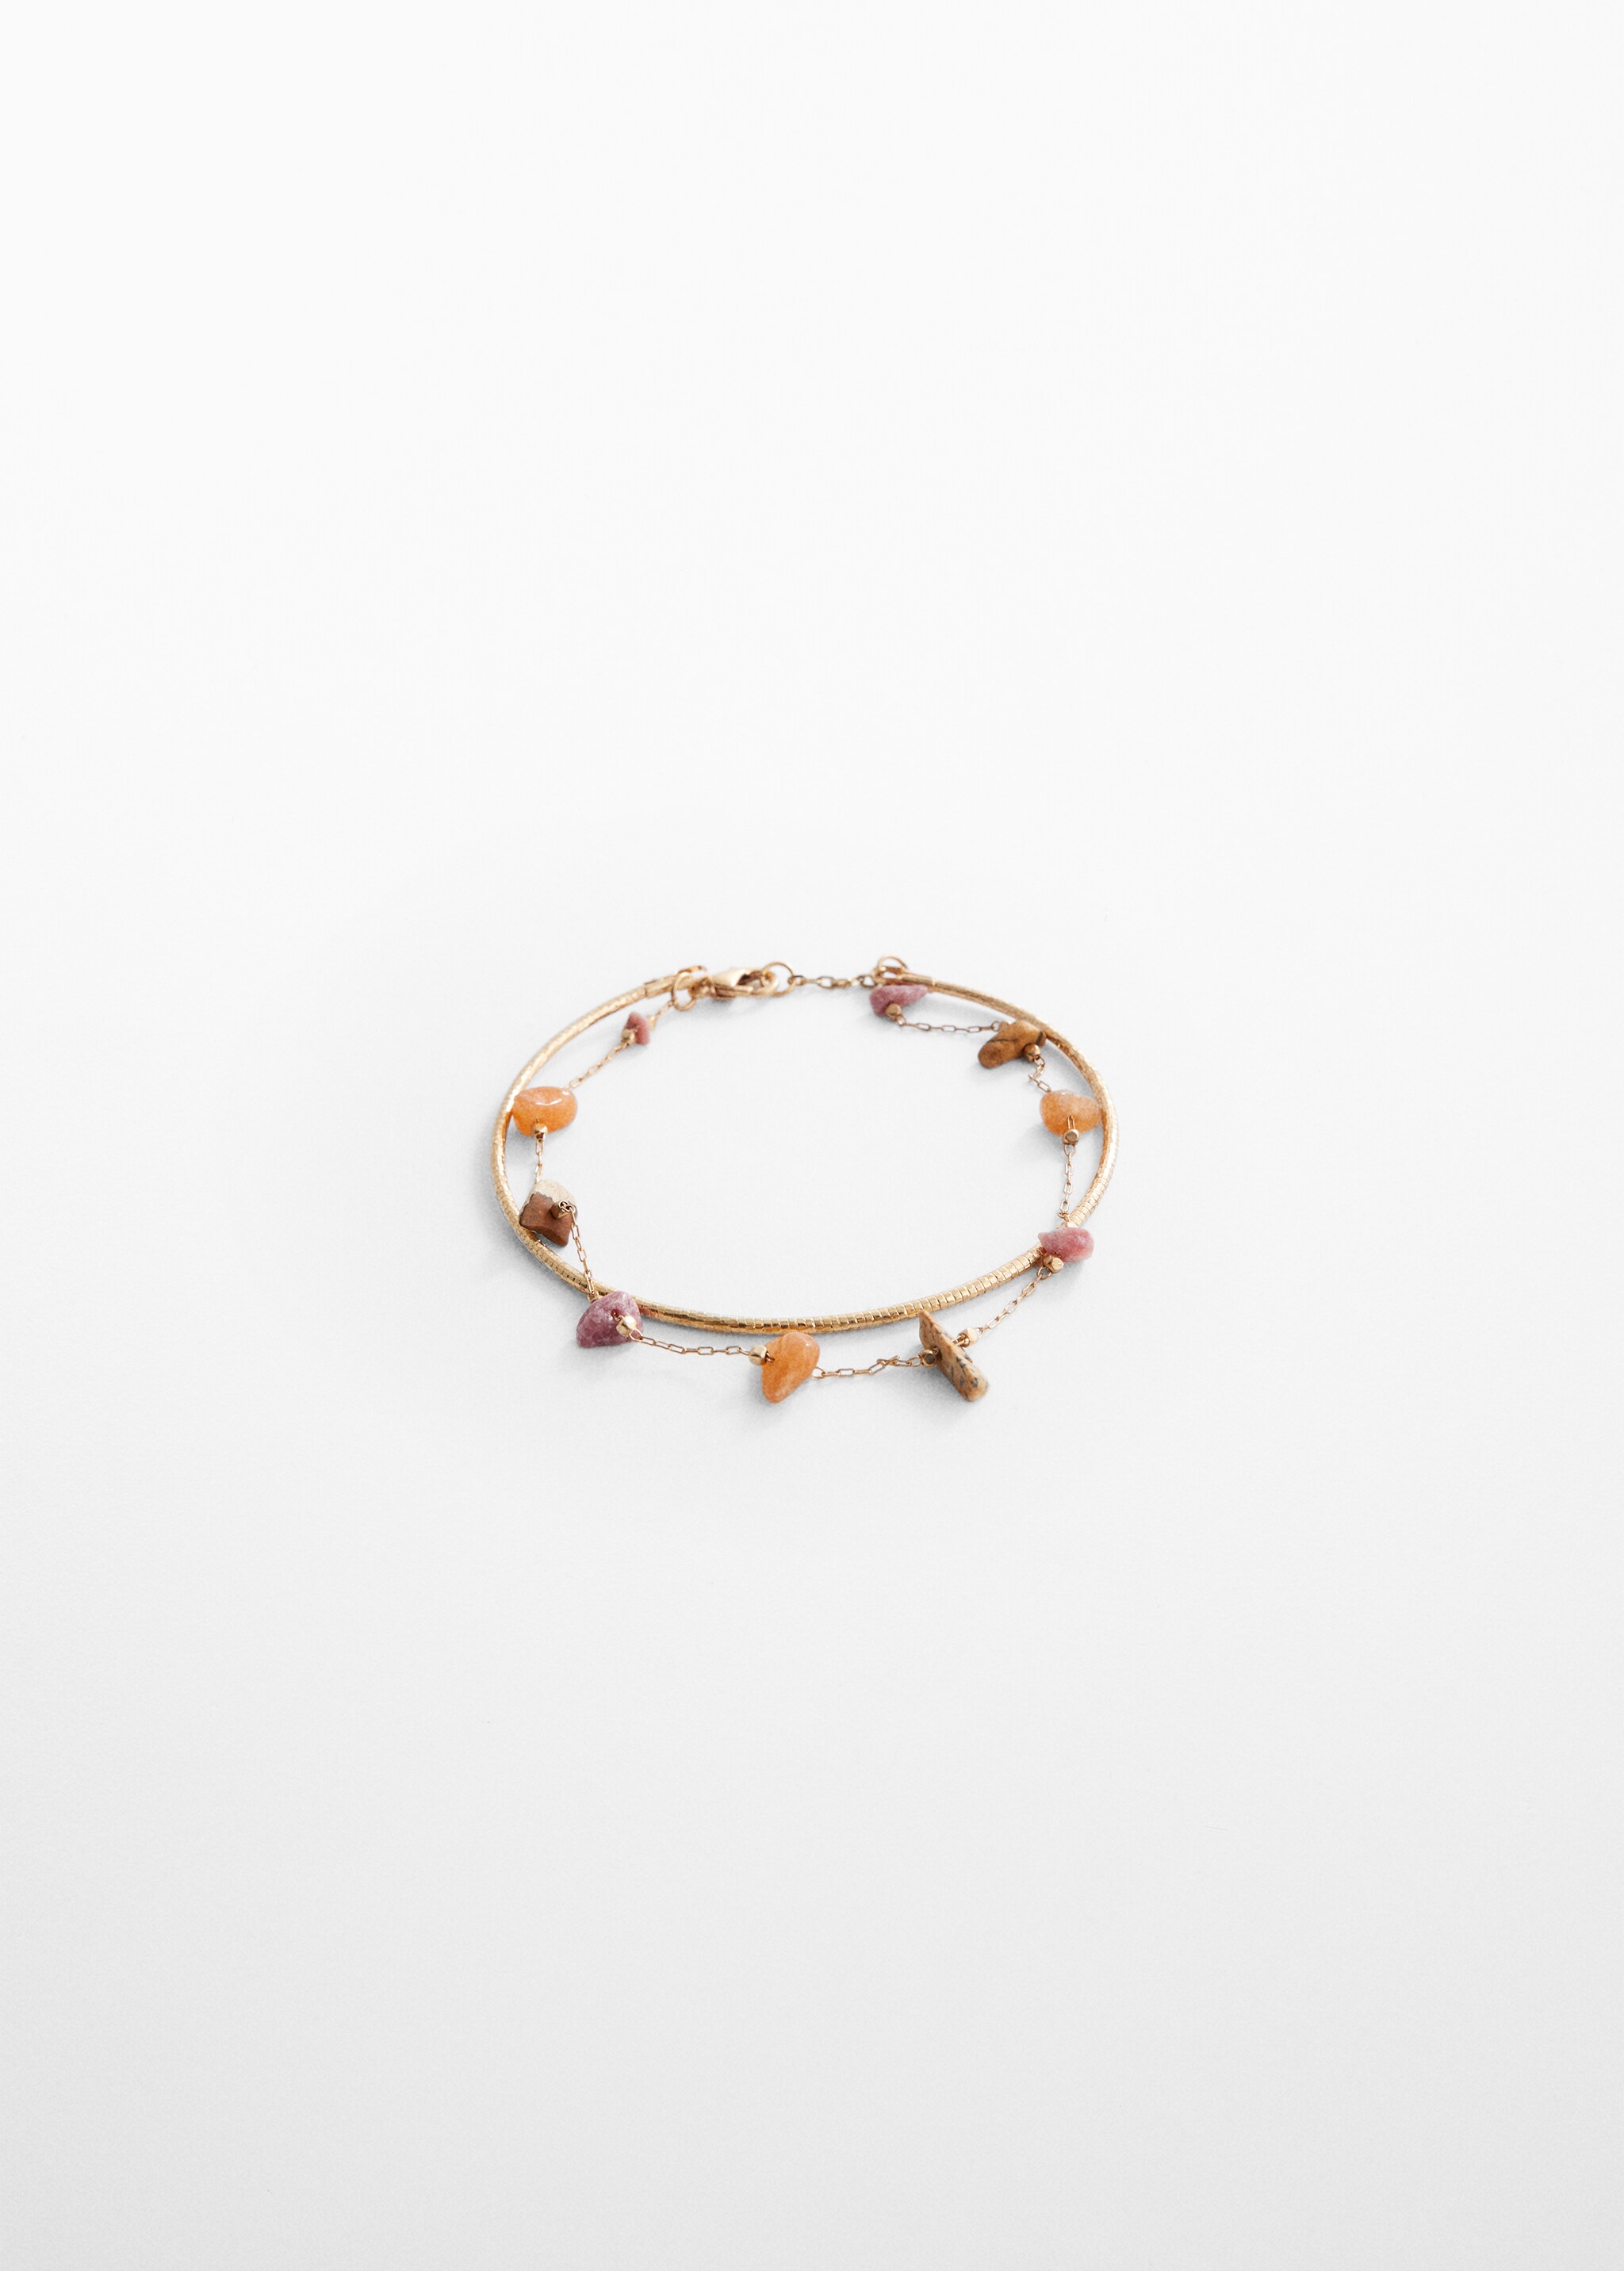 Bead and stone bracelet  - Article without model